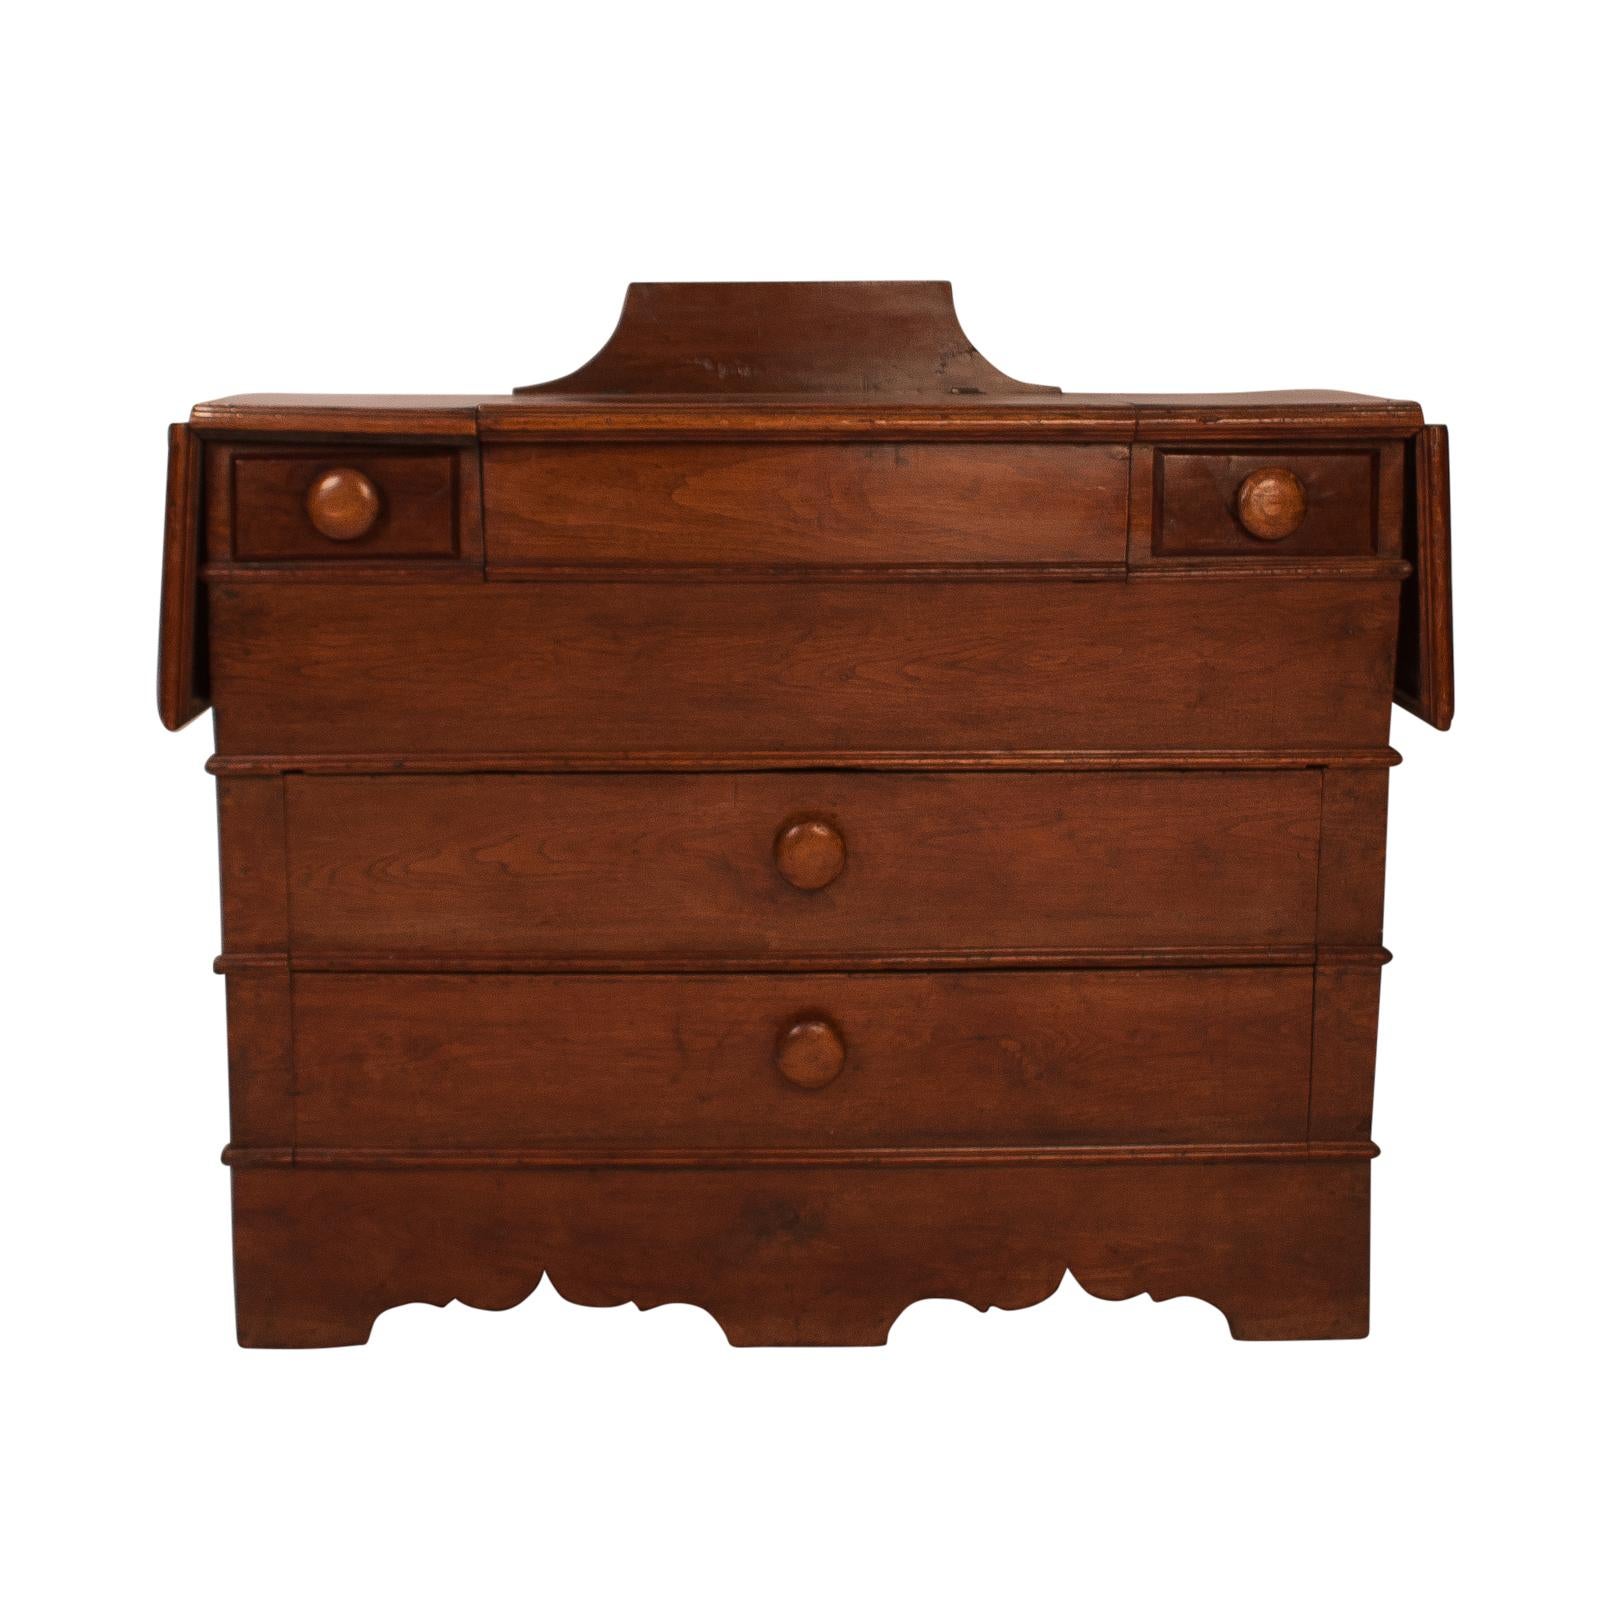 An early Southern Atlantic States black walnut dry sink, circa 1830. There are two drop leaves and two drawers on a tapered body. When opened the piece measures 66